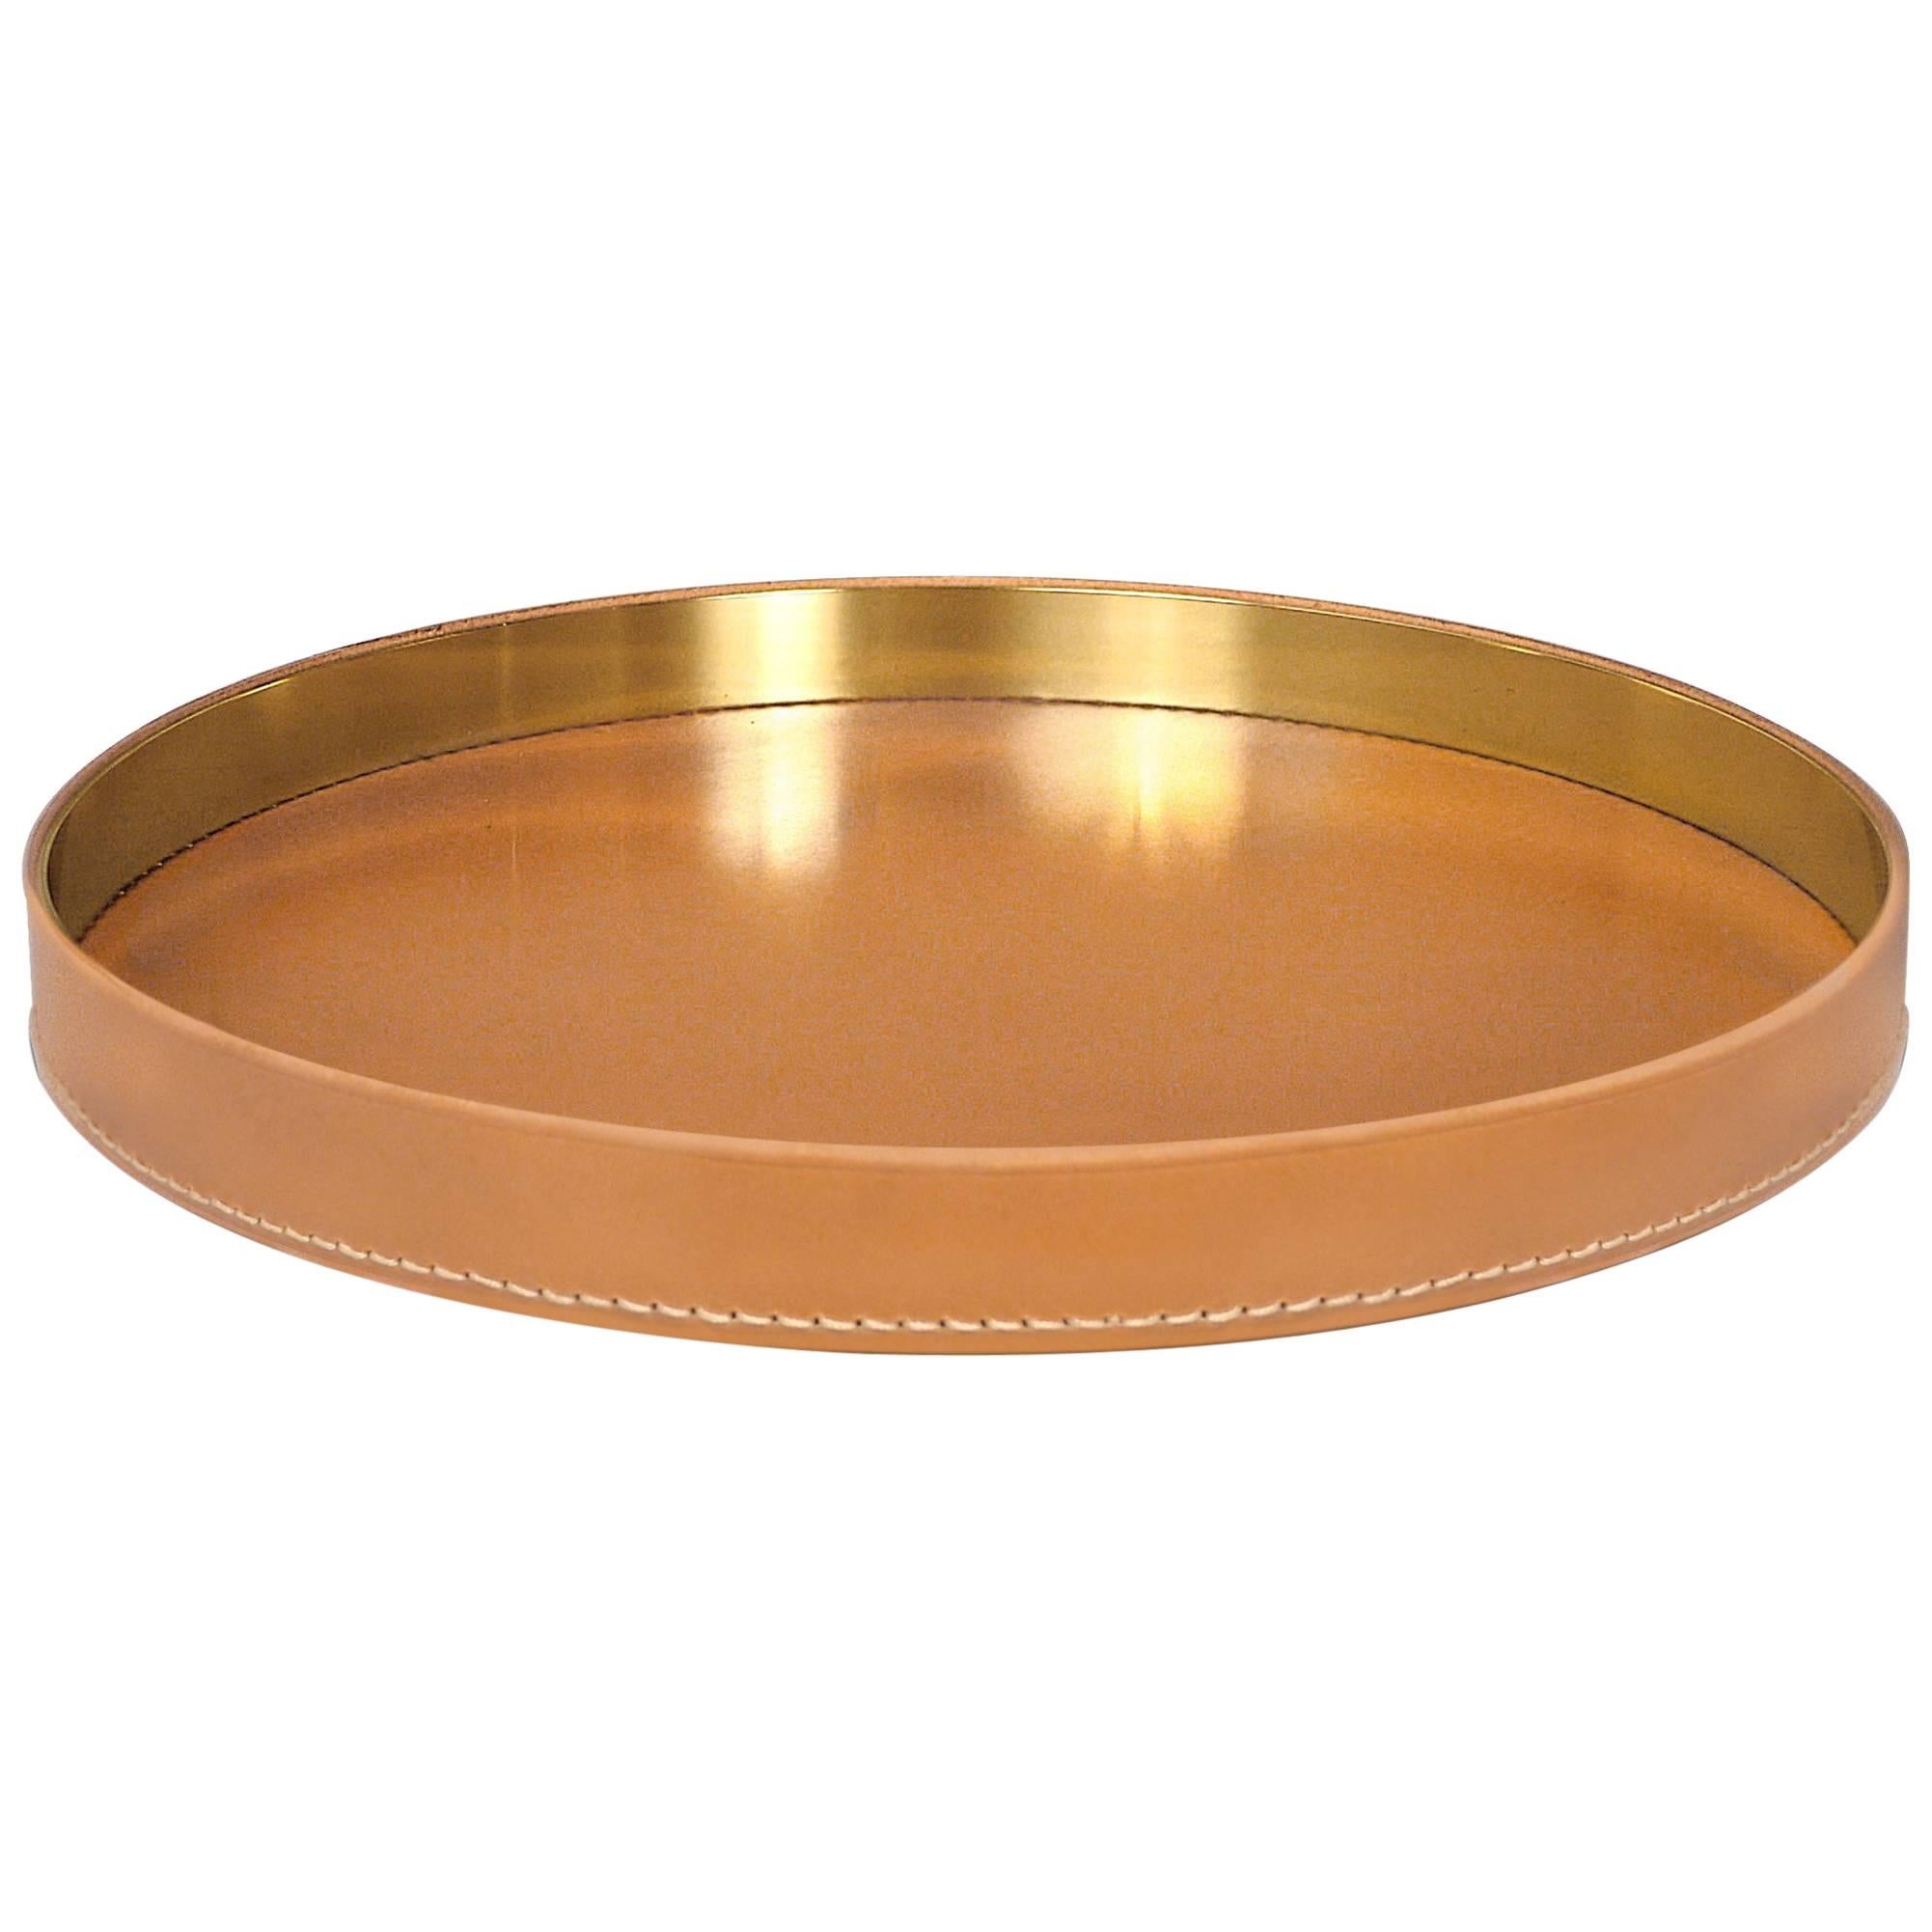 Contemporary Italian Leather and Swedish Brass Modern Minimalist Artisan Tray For Sale